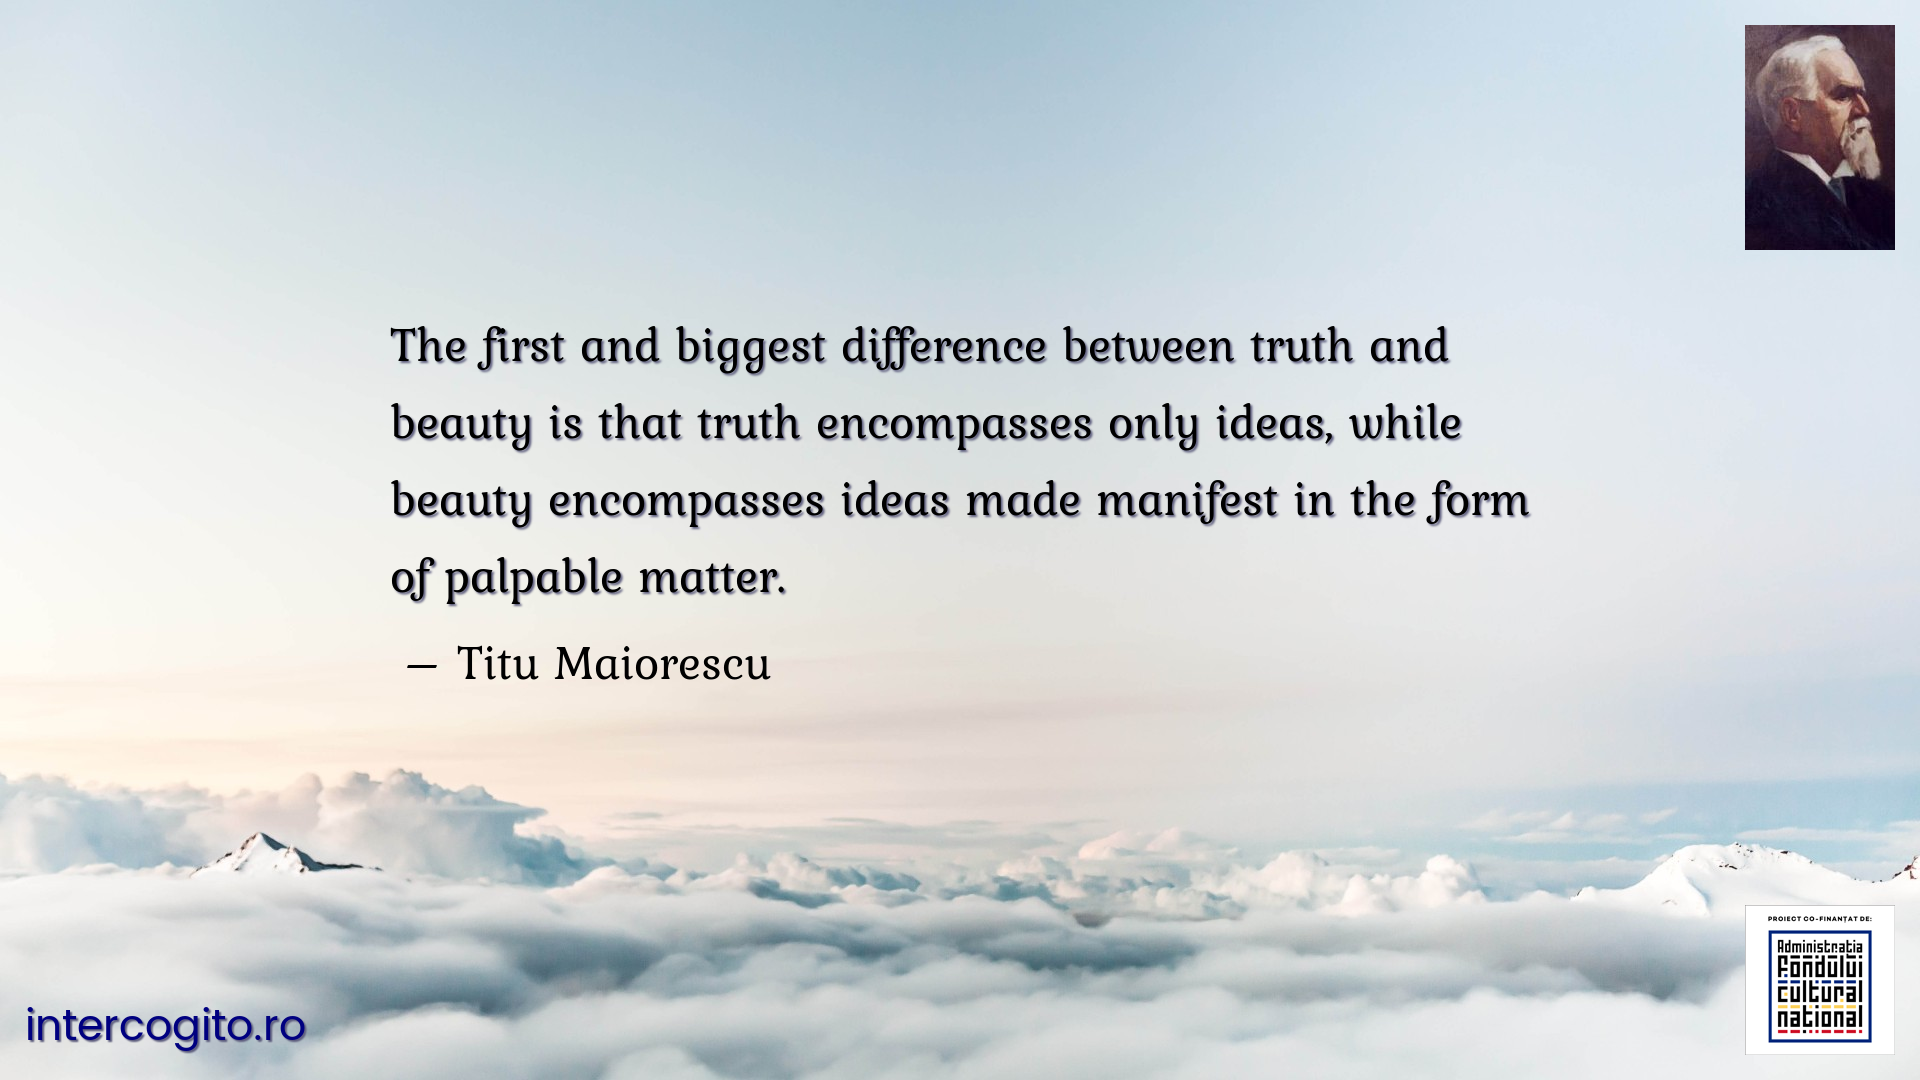 The first and biggest difference between truth and beauty is that truth encompasses only ideas, while beauty encompasses ideas made manifest in the form of palpable matter.